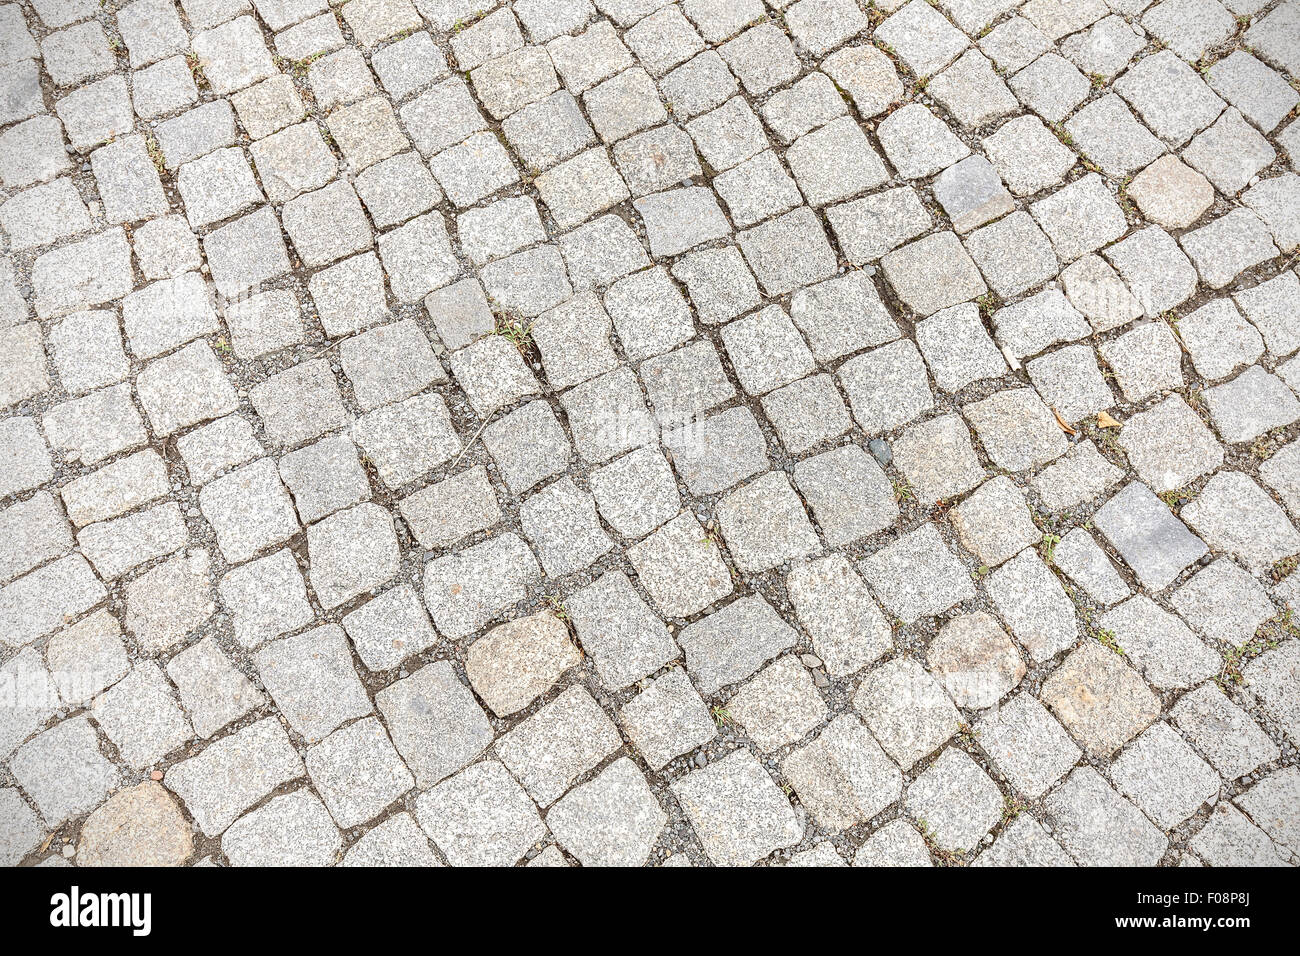 Natural grey stone pavement background of texture. Stock Photo